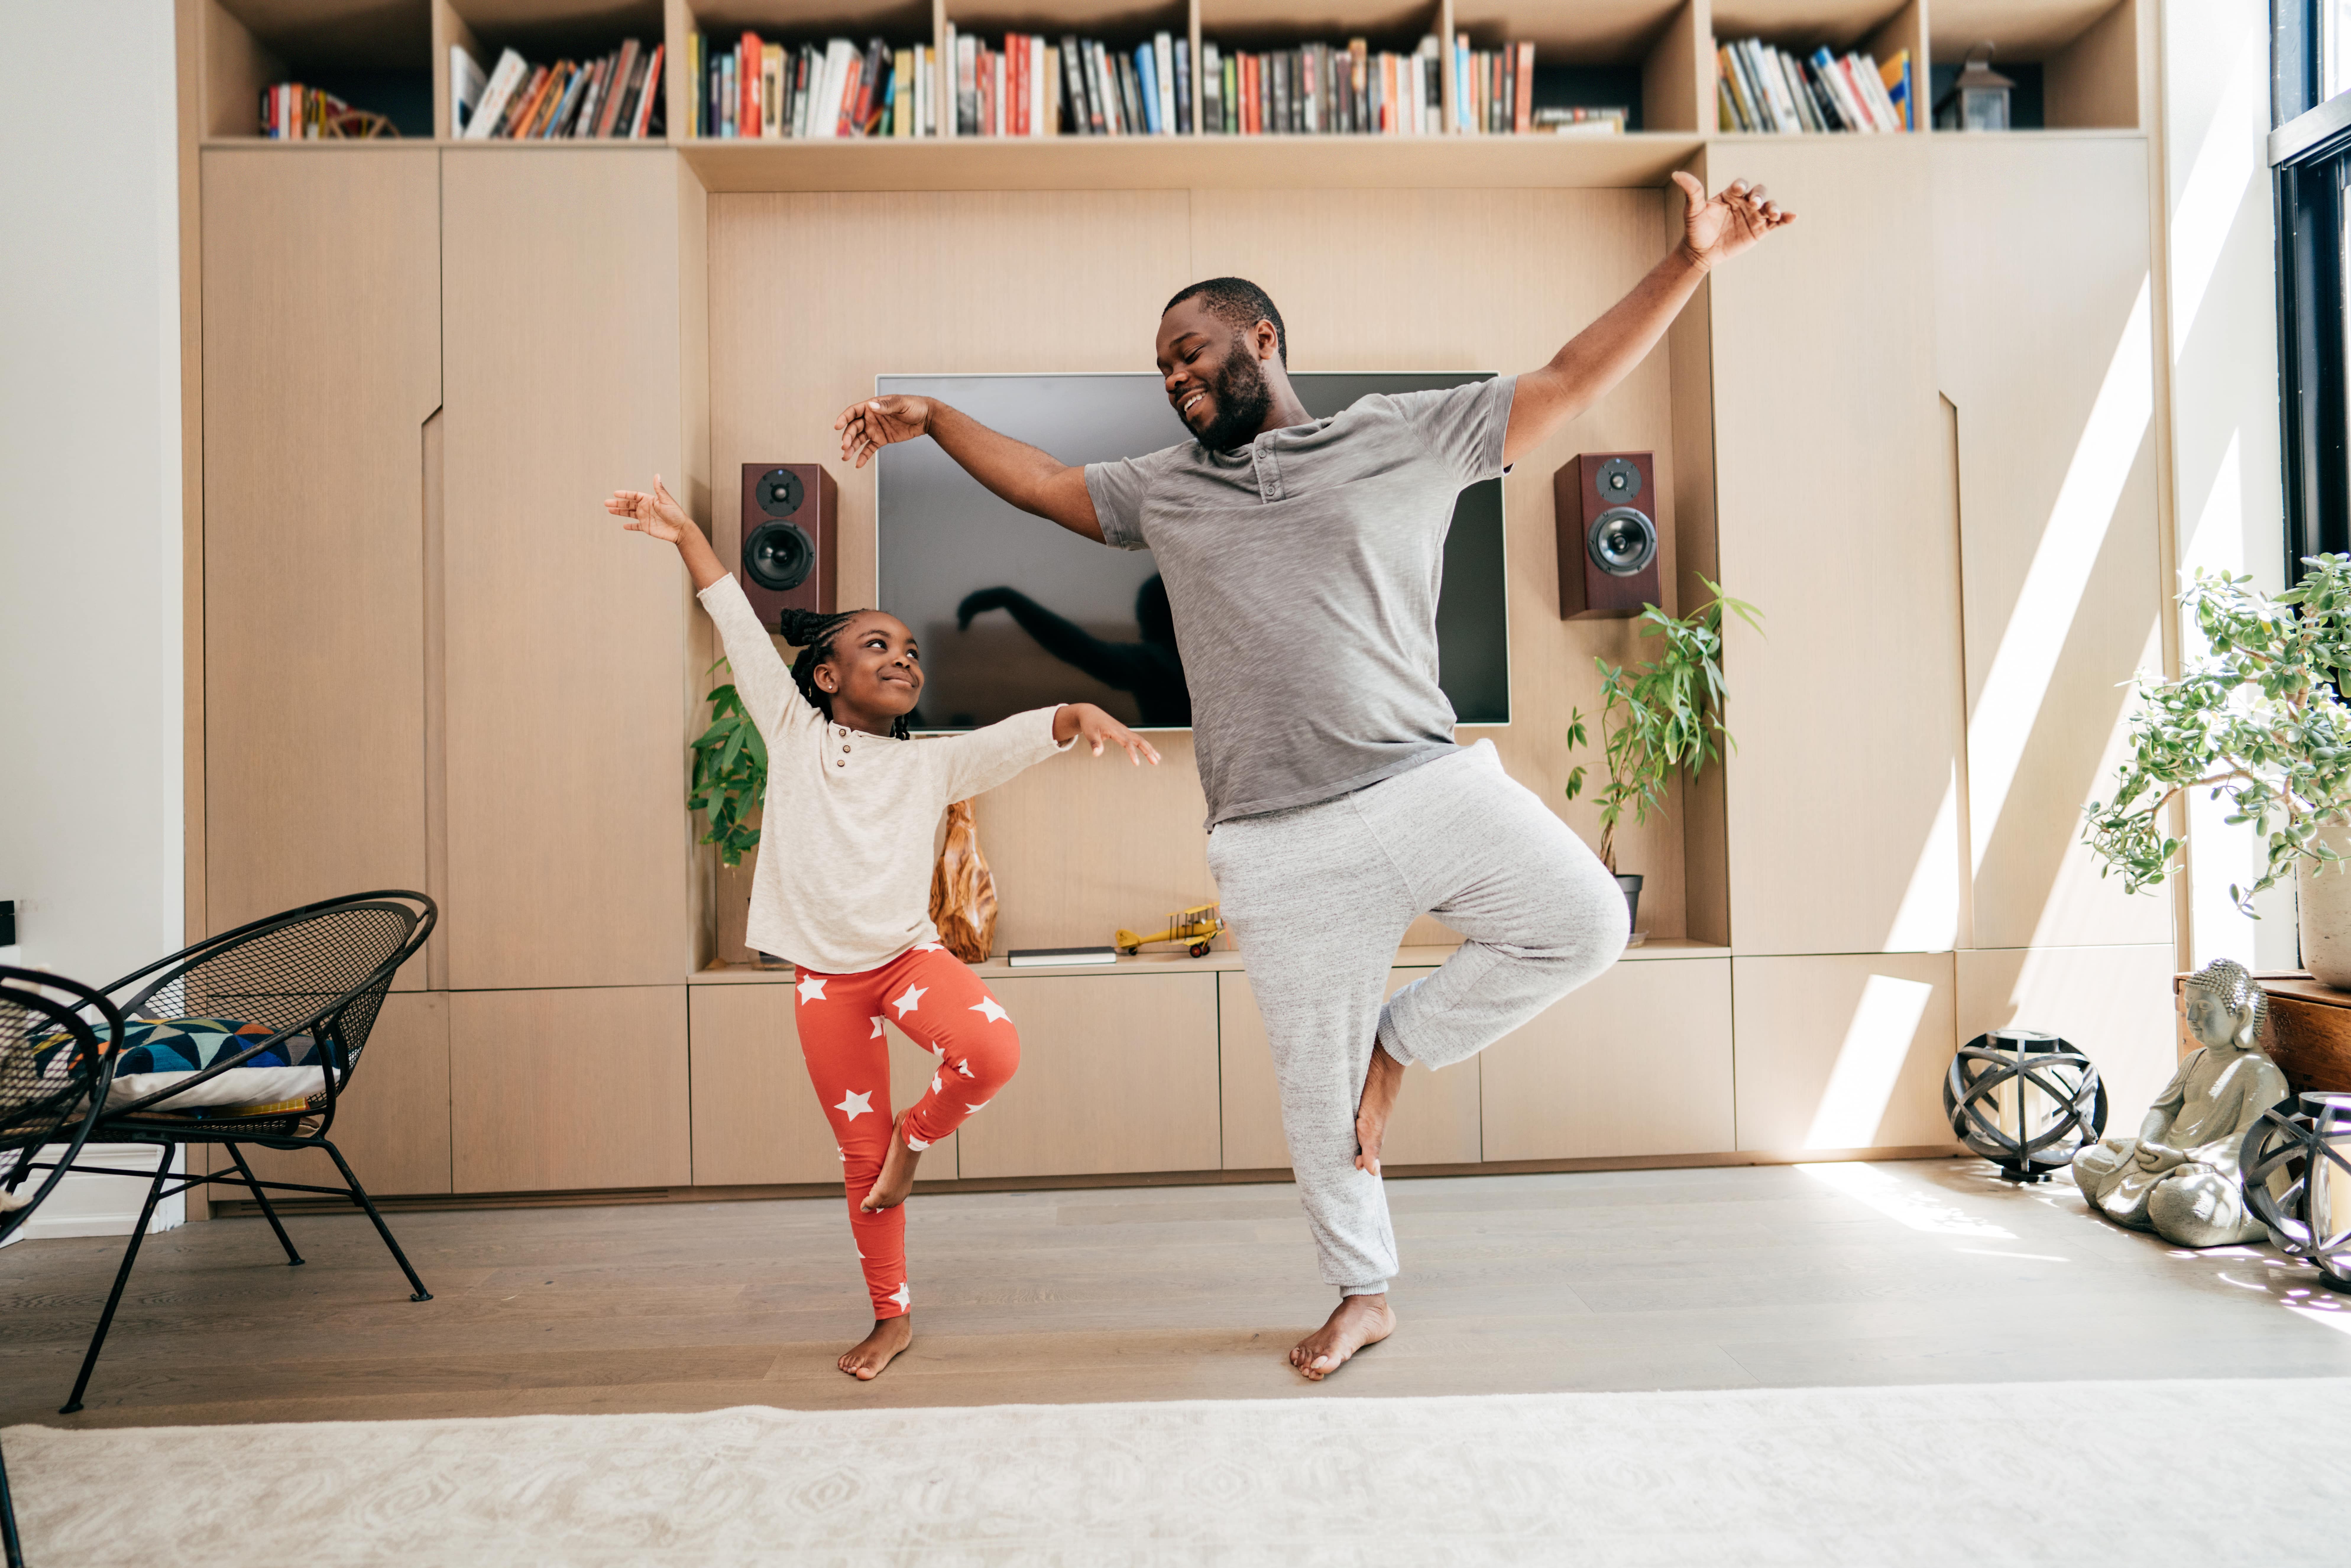 A little girl and an adult doing a yoga stance in the living room